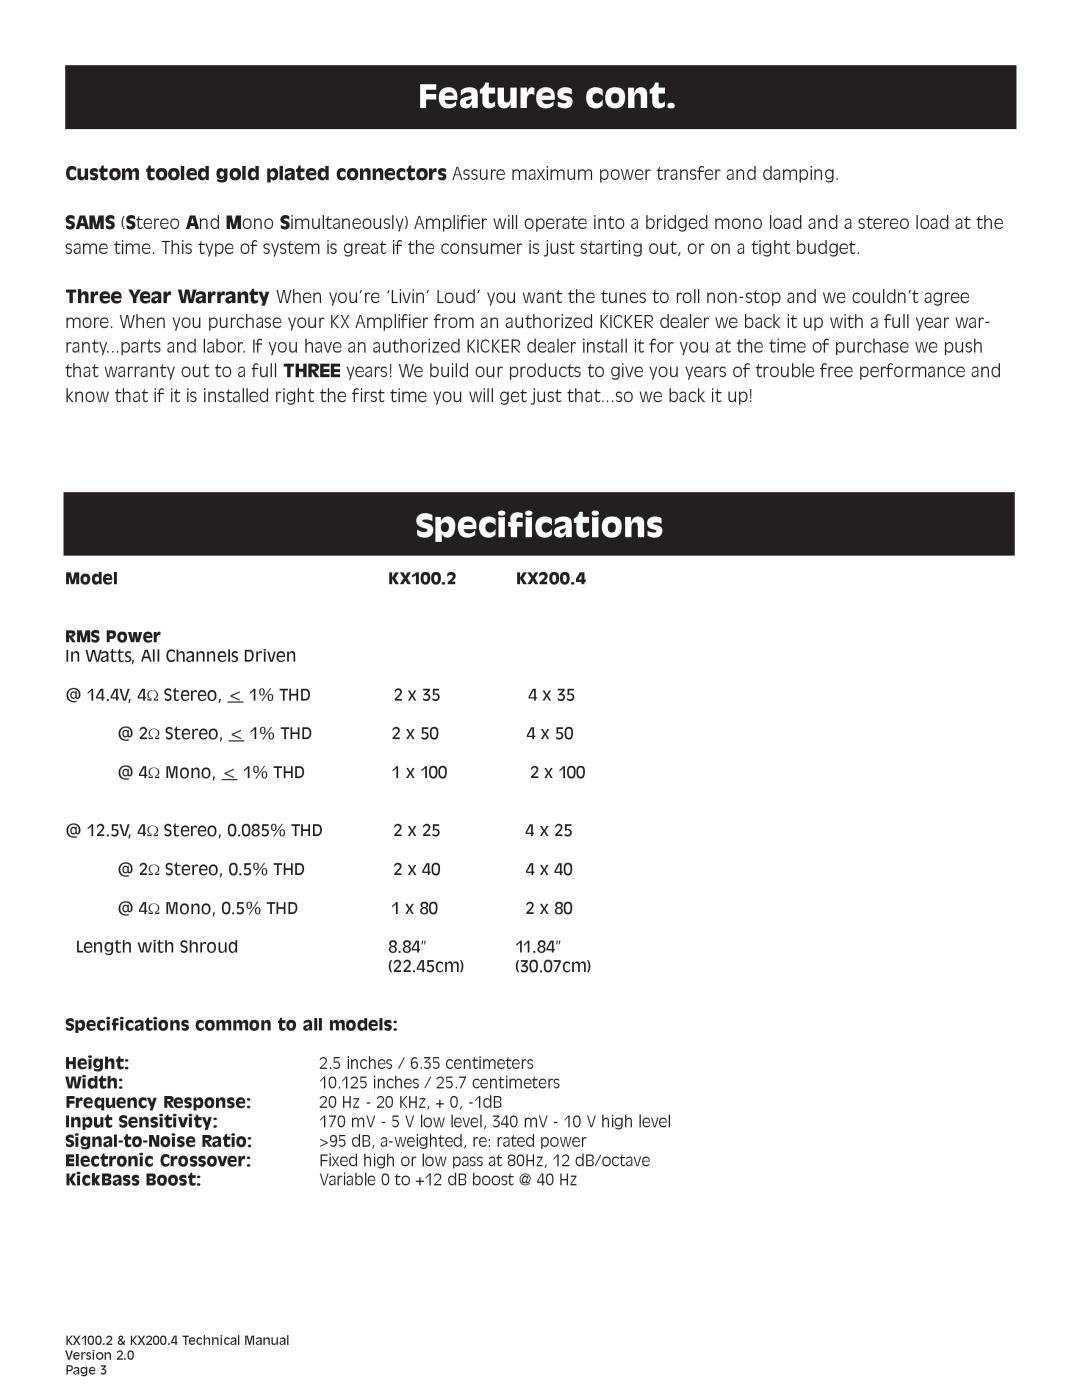 Kicker KX200.4 technical manual Features cont, Specifications 